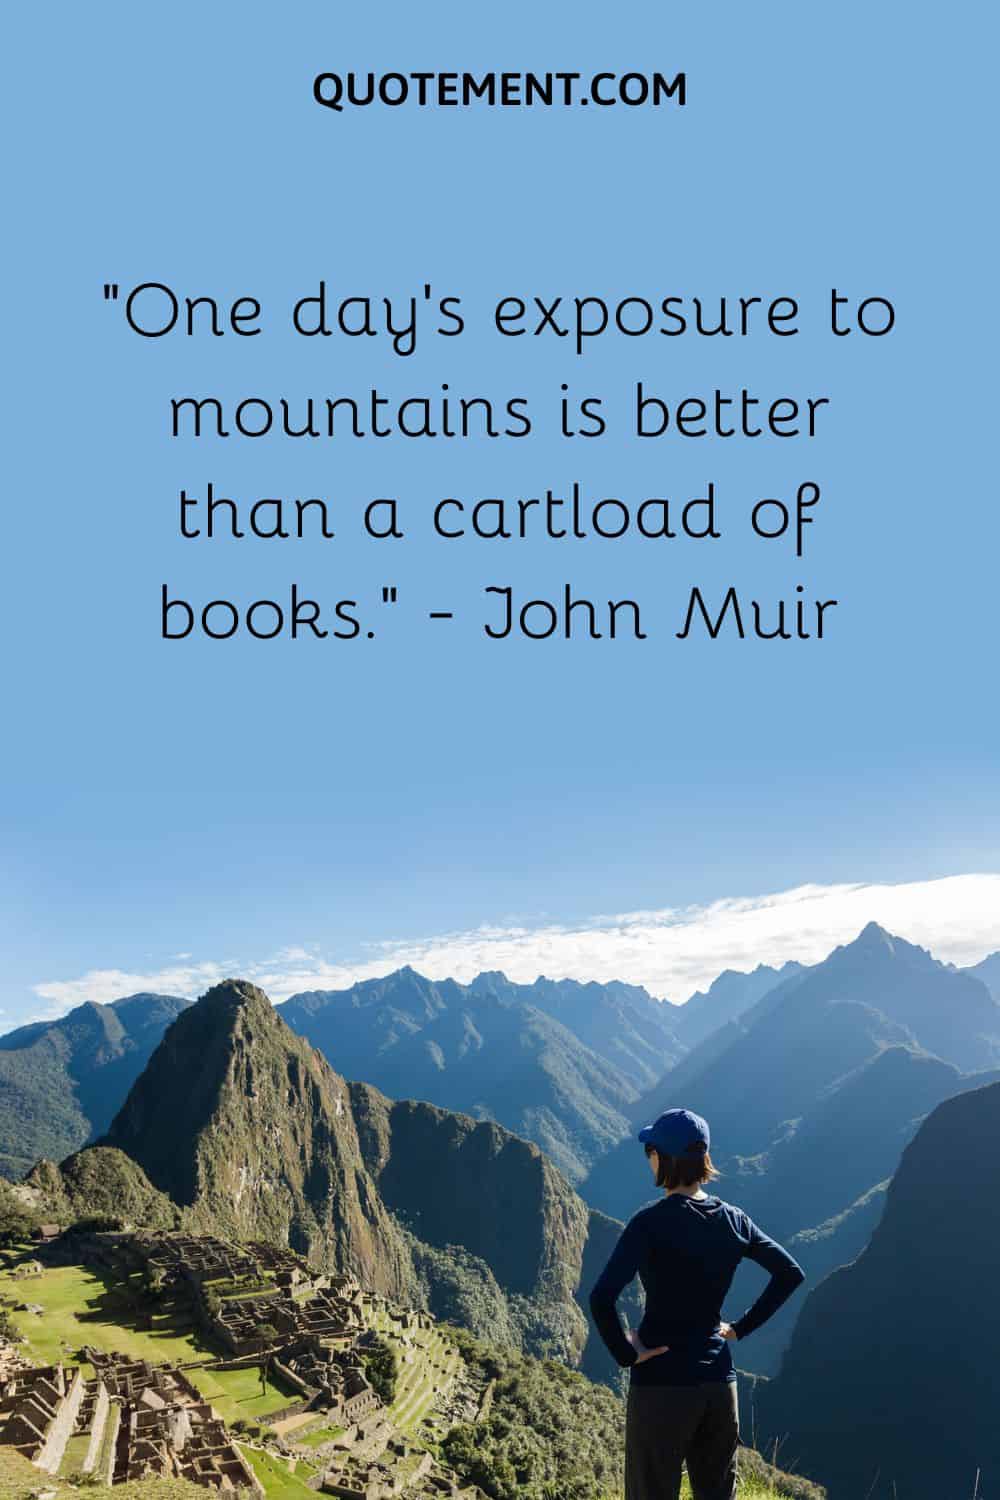 “One day’s exposure to mountains is better than a cartload of books.” — John Muir